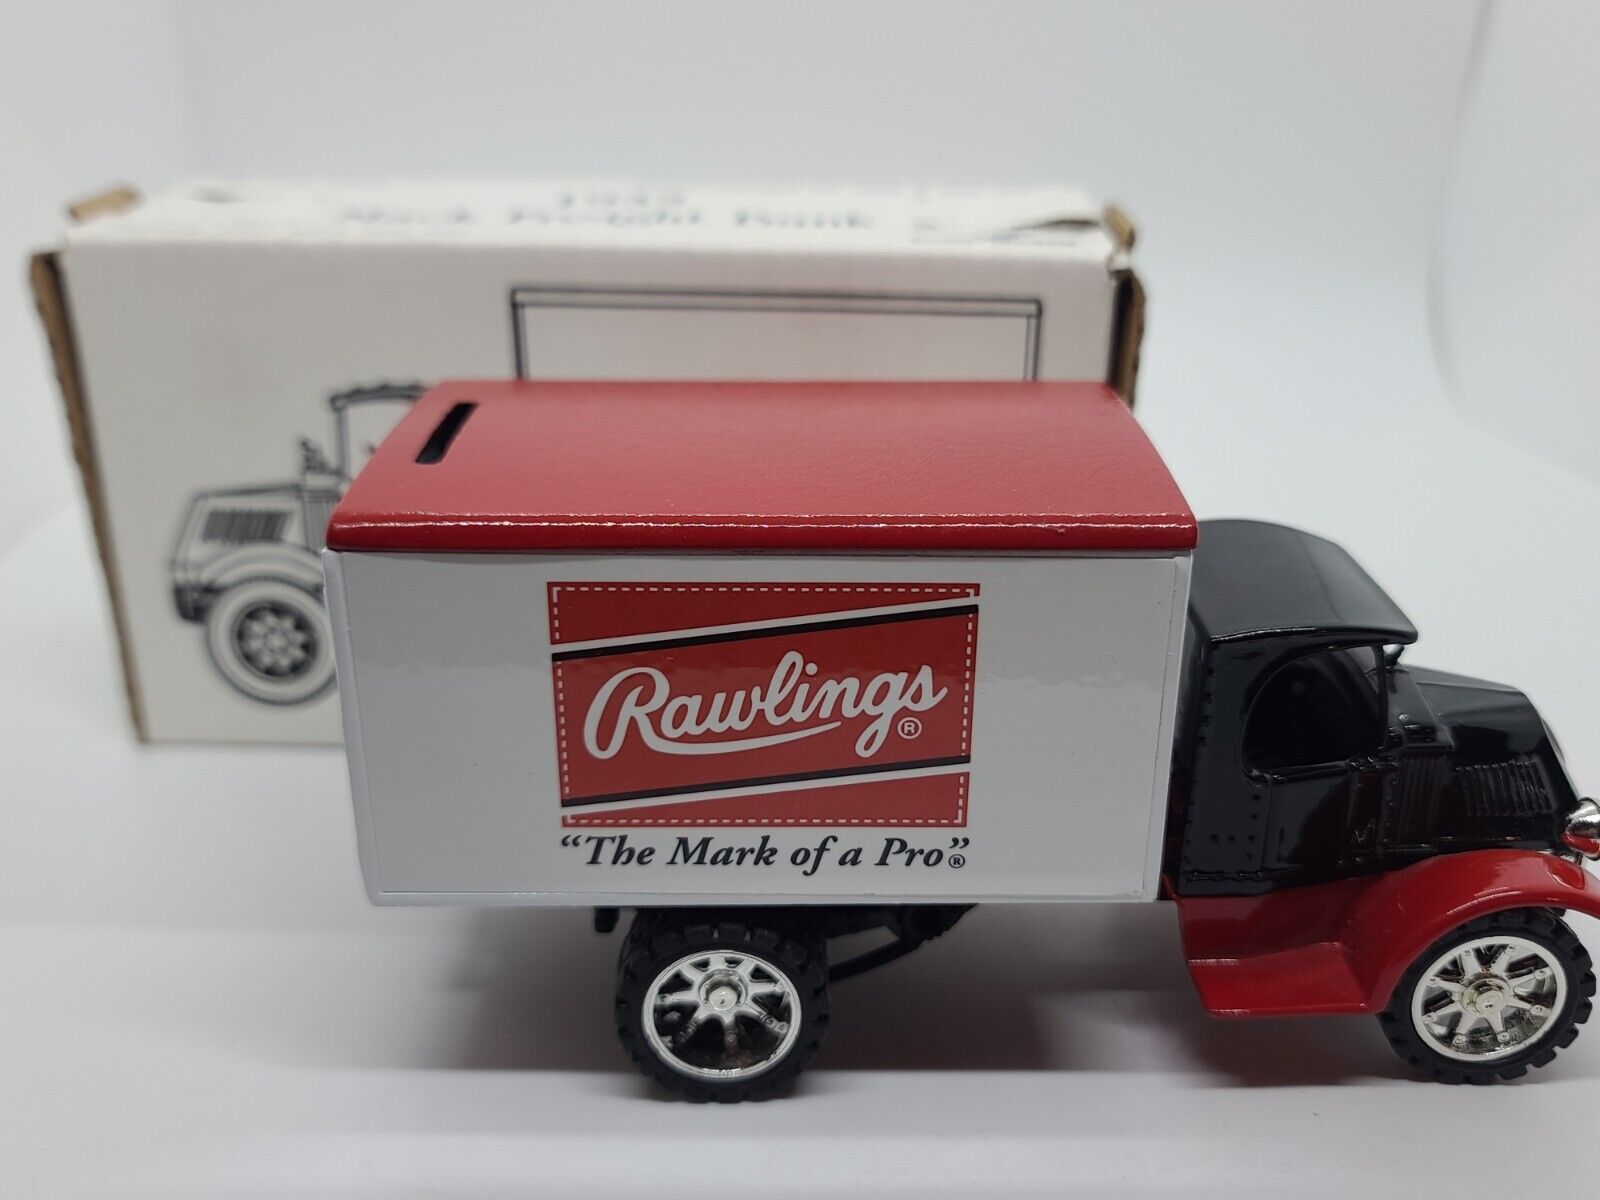 New 1994 Rawlings ERTL Collectible Bank 1935 Mack Freight Truck NOS with Box